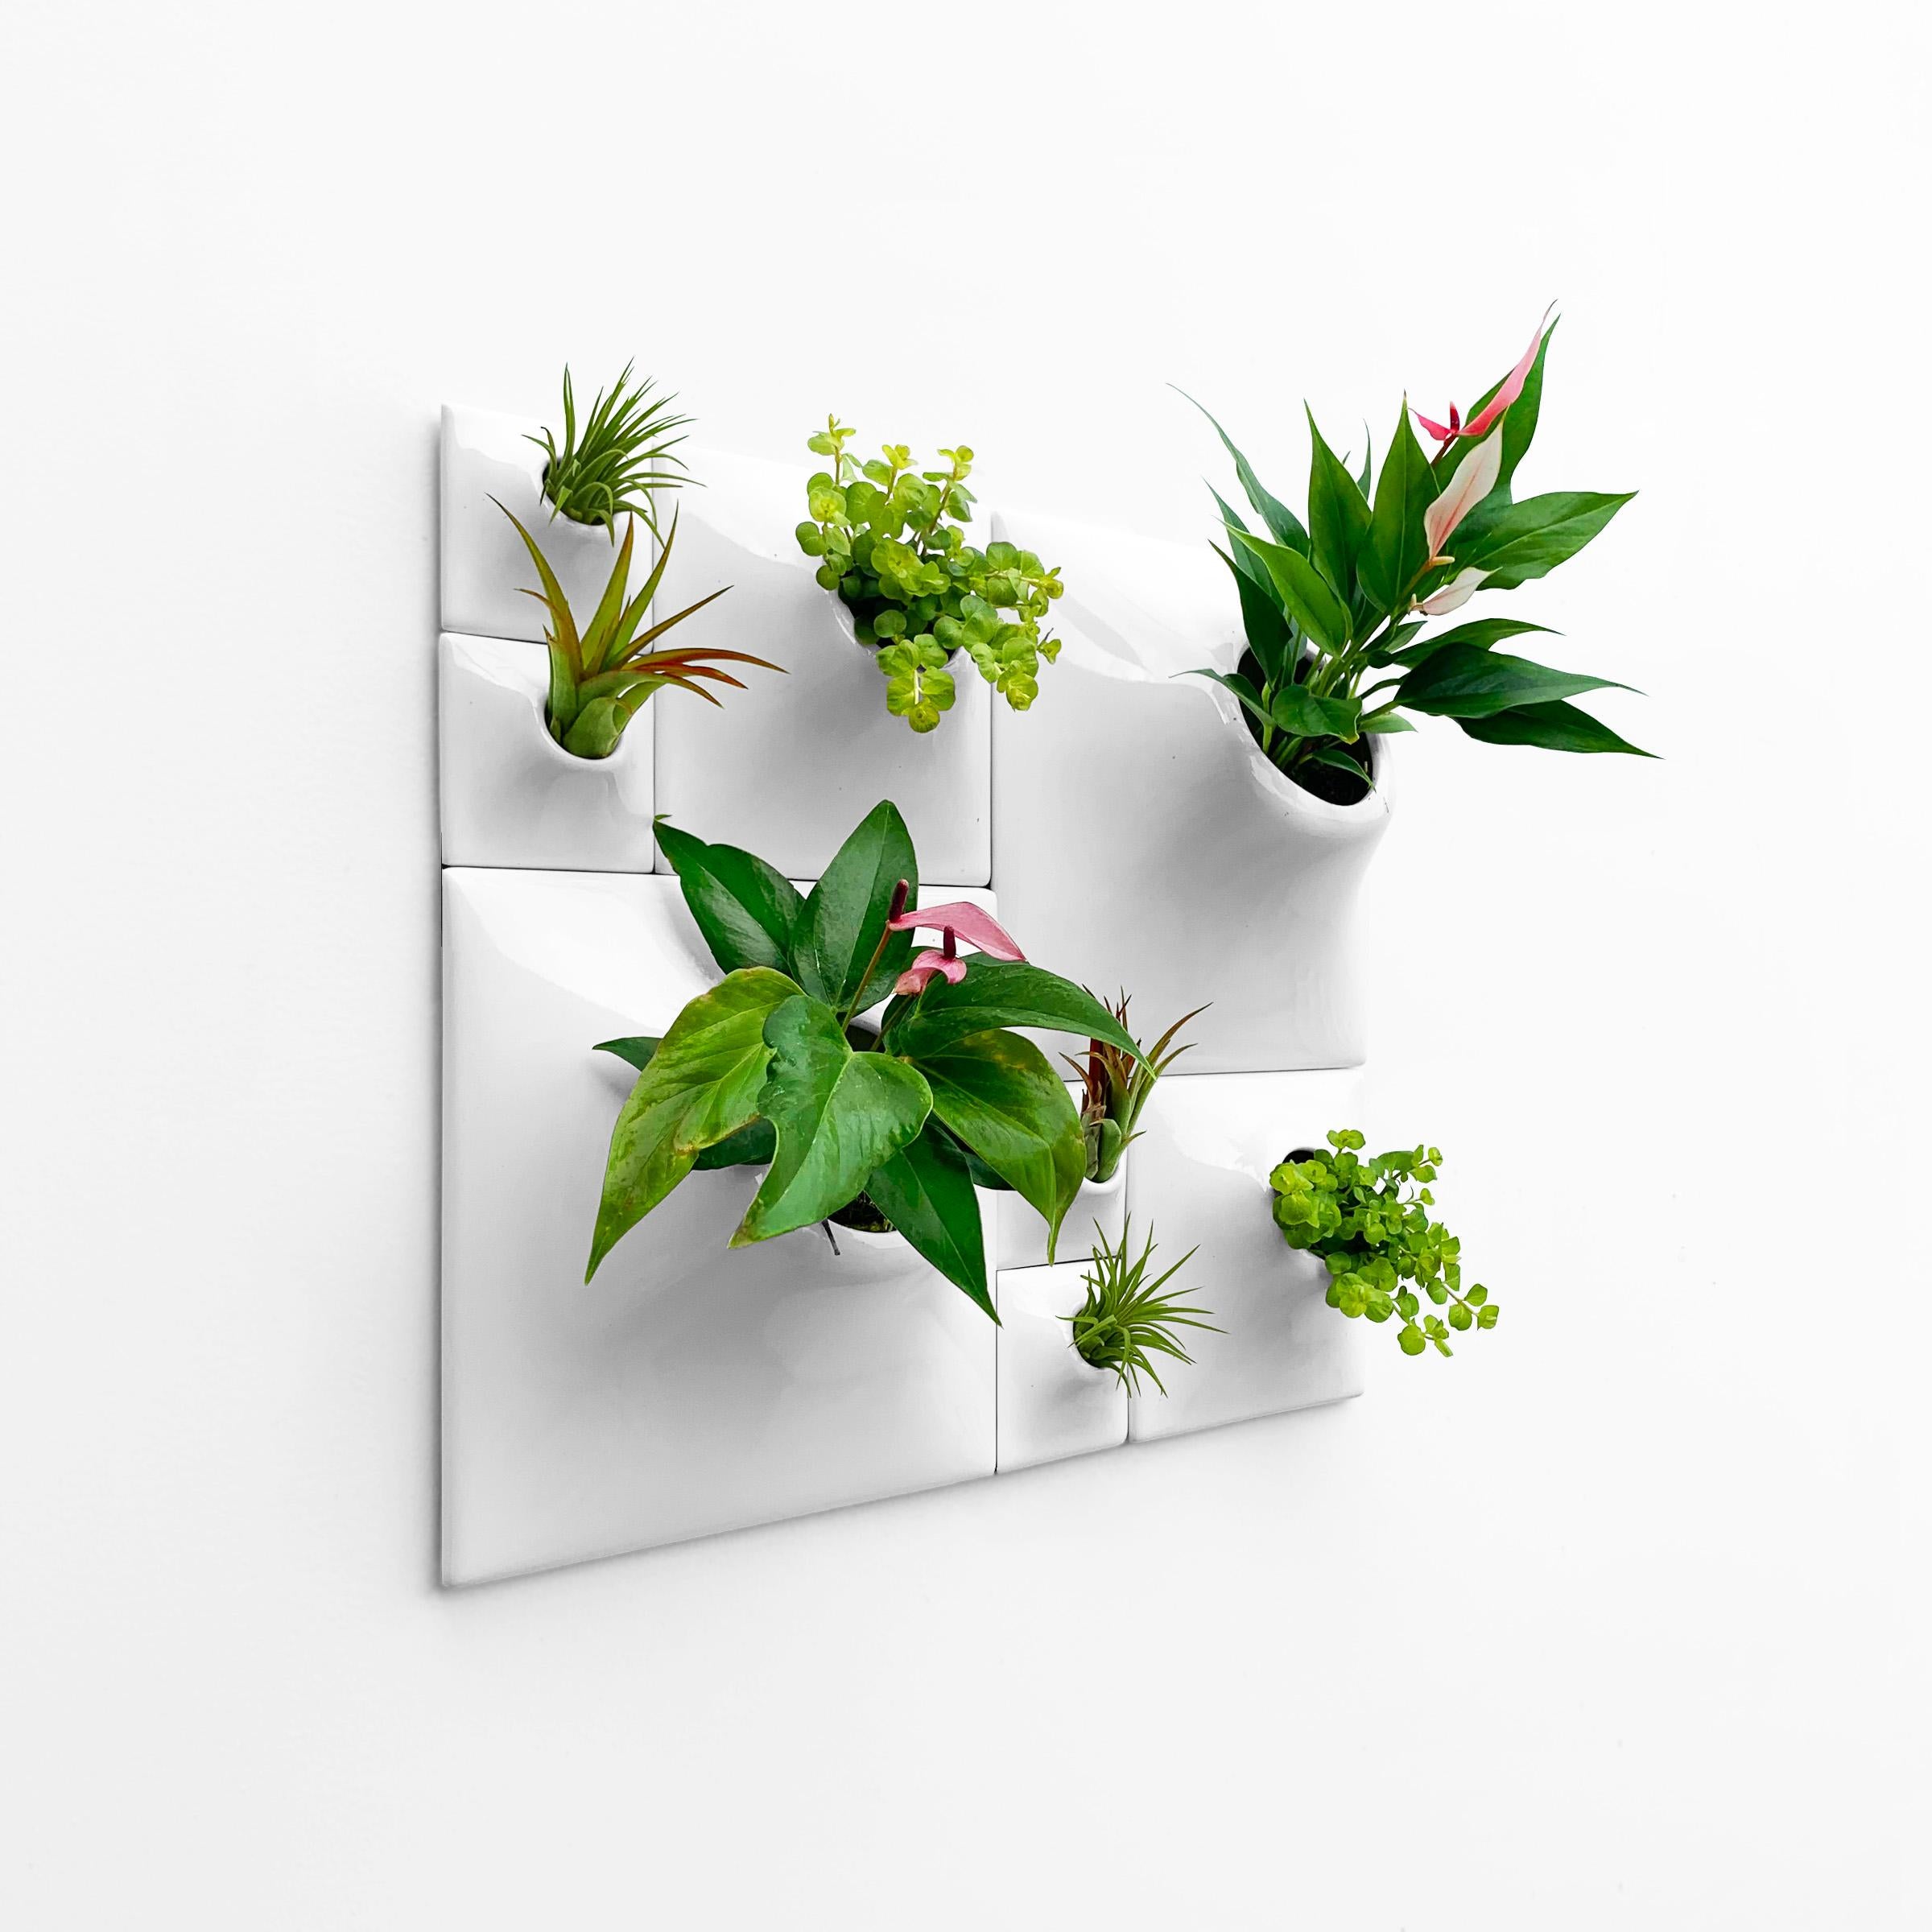 Modern White Wall Planter Set, Greenwall Sculpture, Living Wall Decor, Node BS2 In New Condition For Sale In Bridgeport, PA